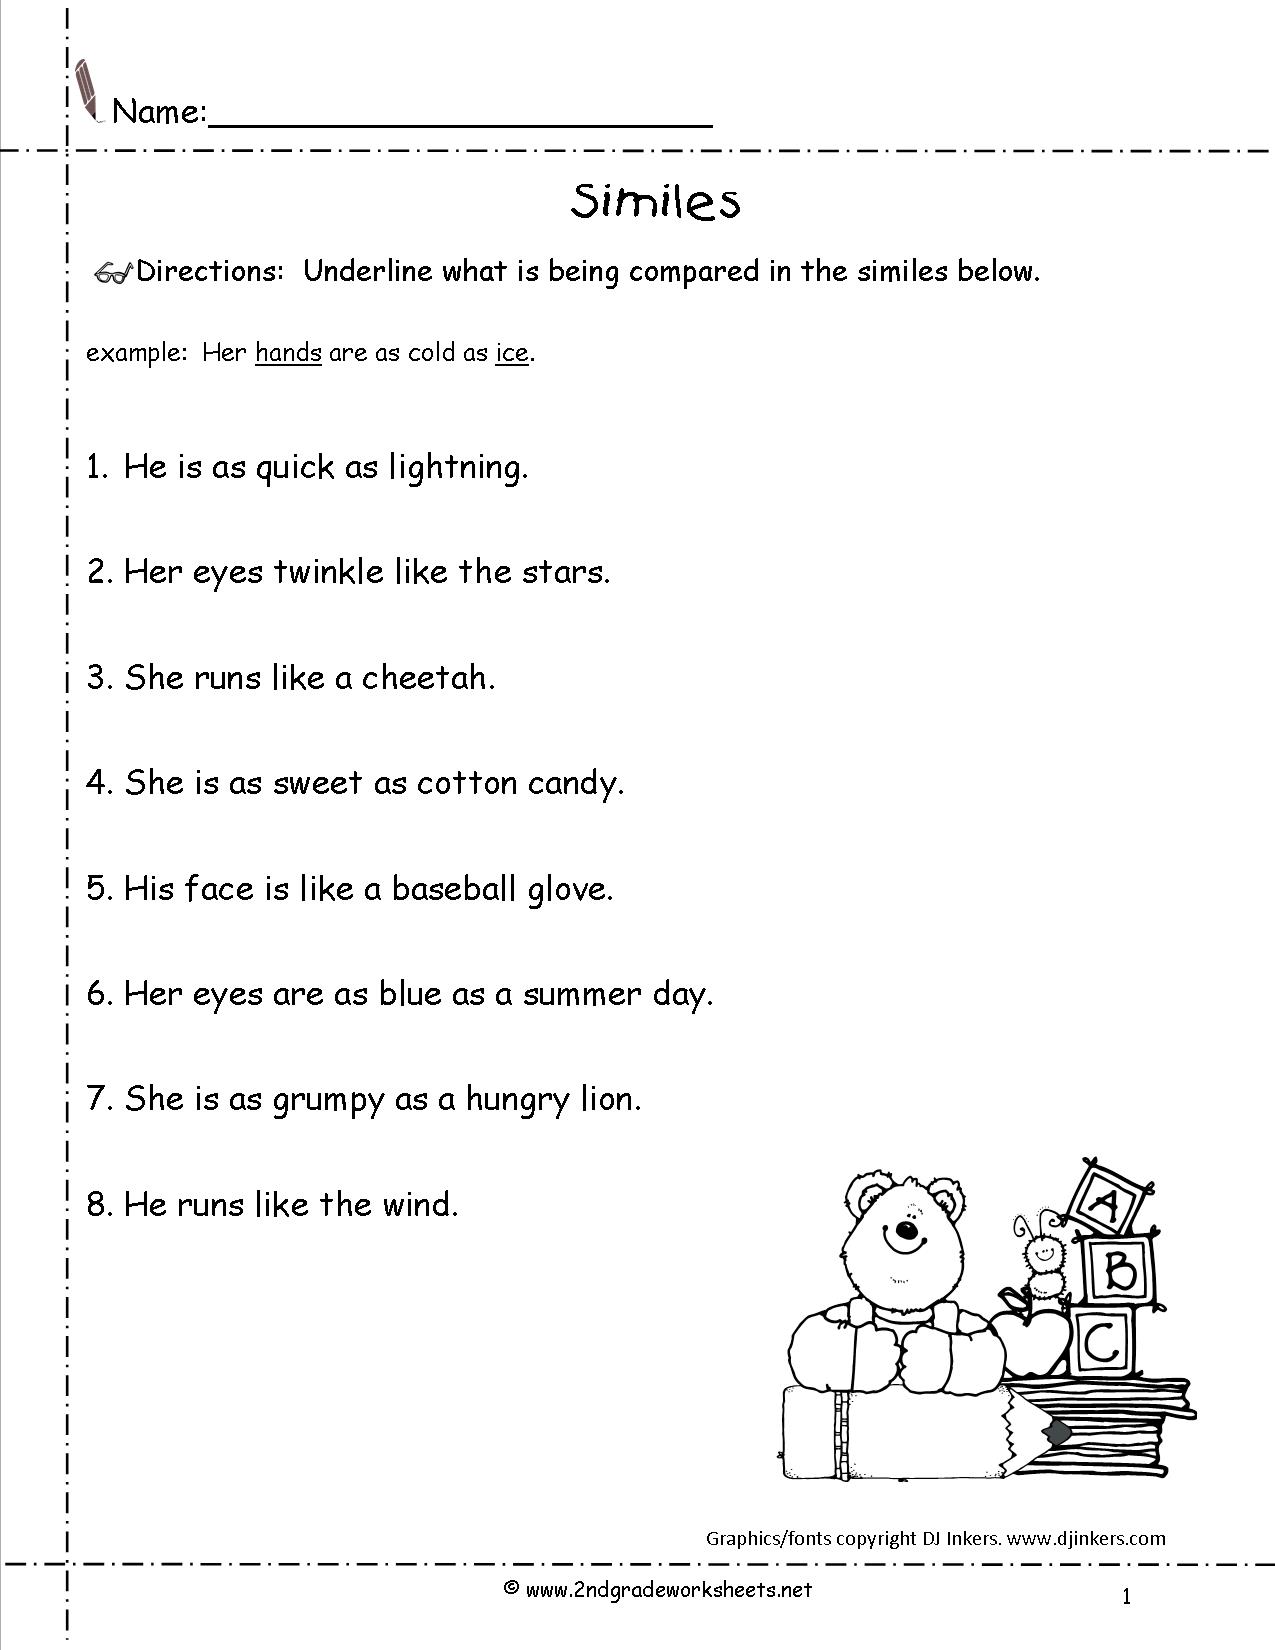 14 Best Images of Contractions List Worksheet - Contractions Worksheet